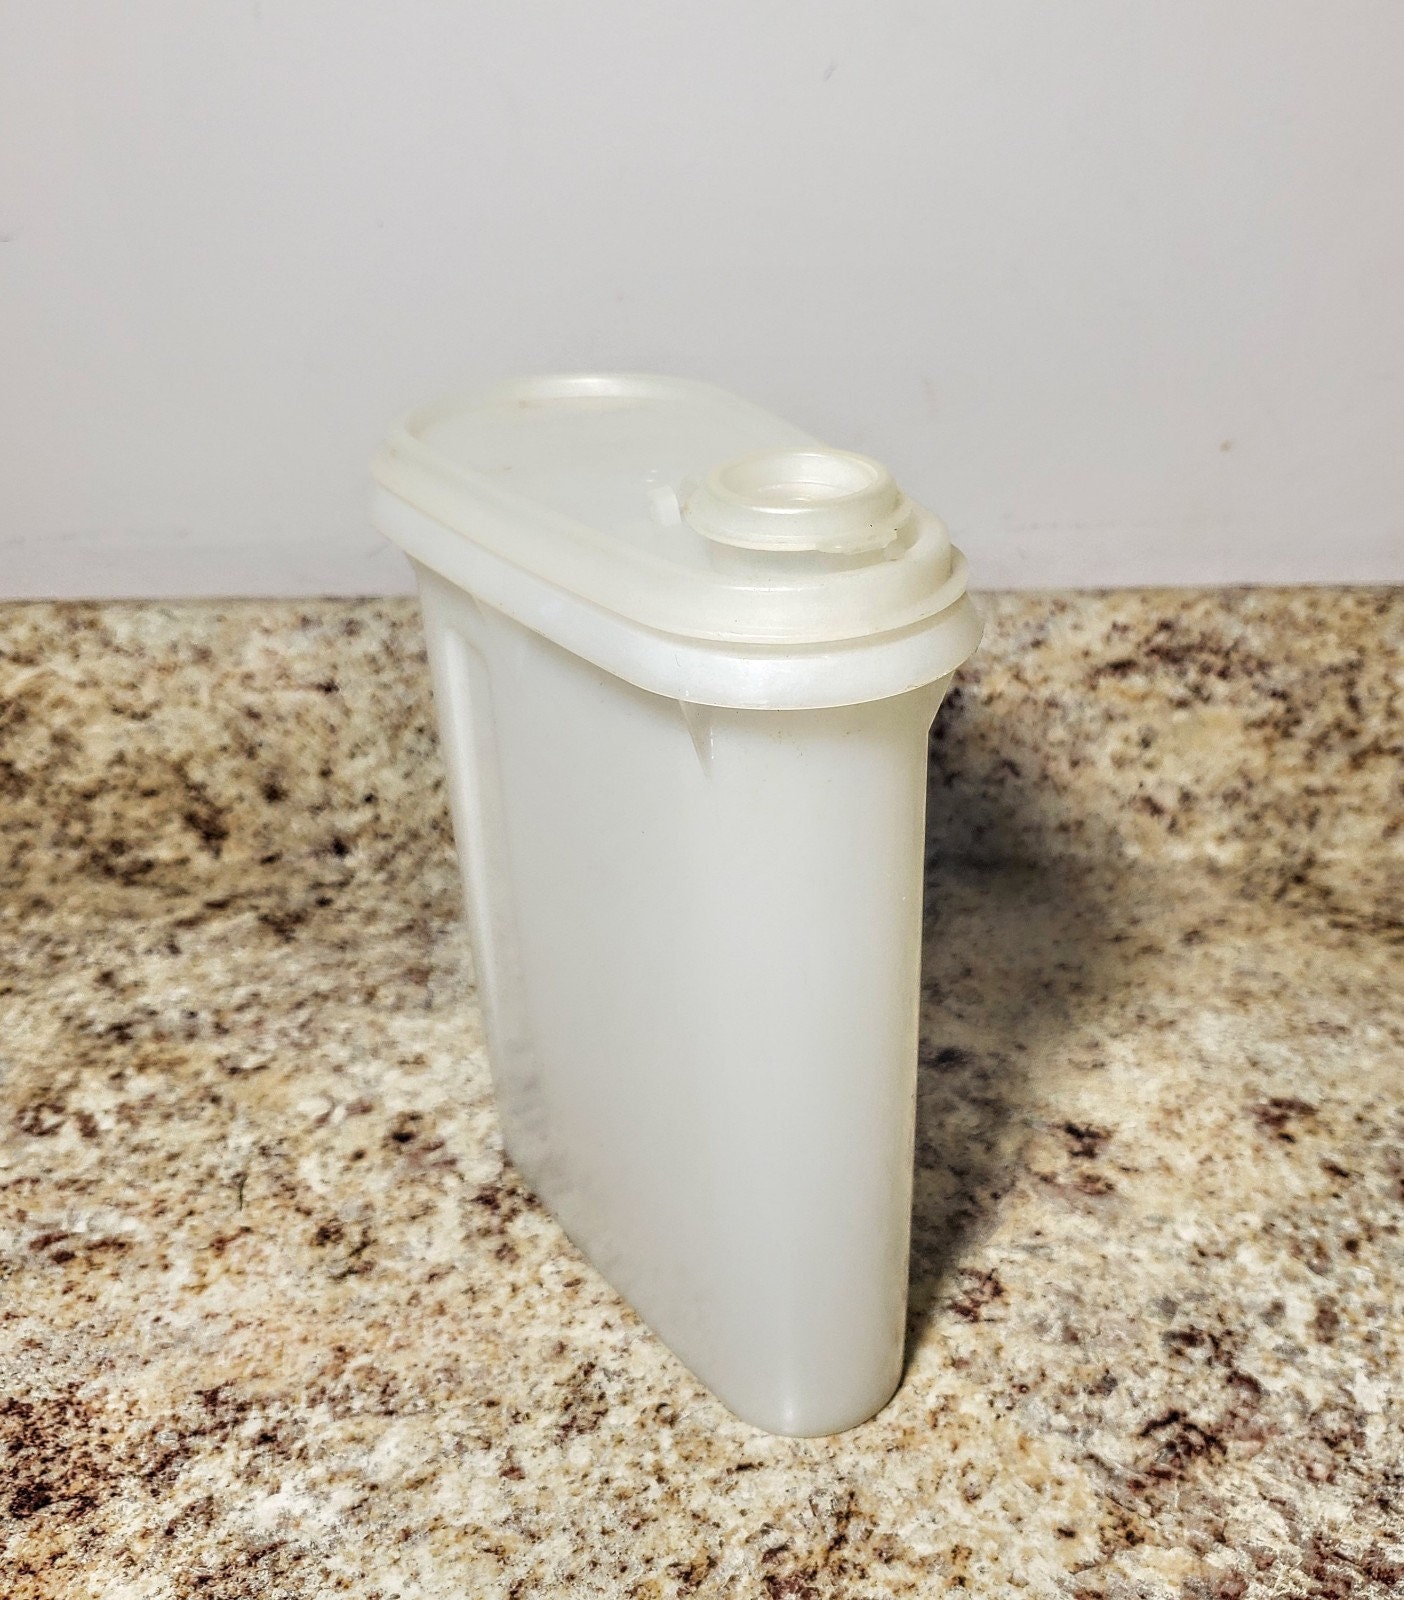 Tupperware 7737A-7 Dressing Shaker 15 Oz Container With Pour Spout